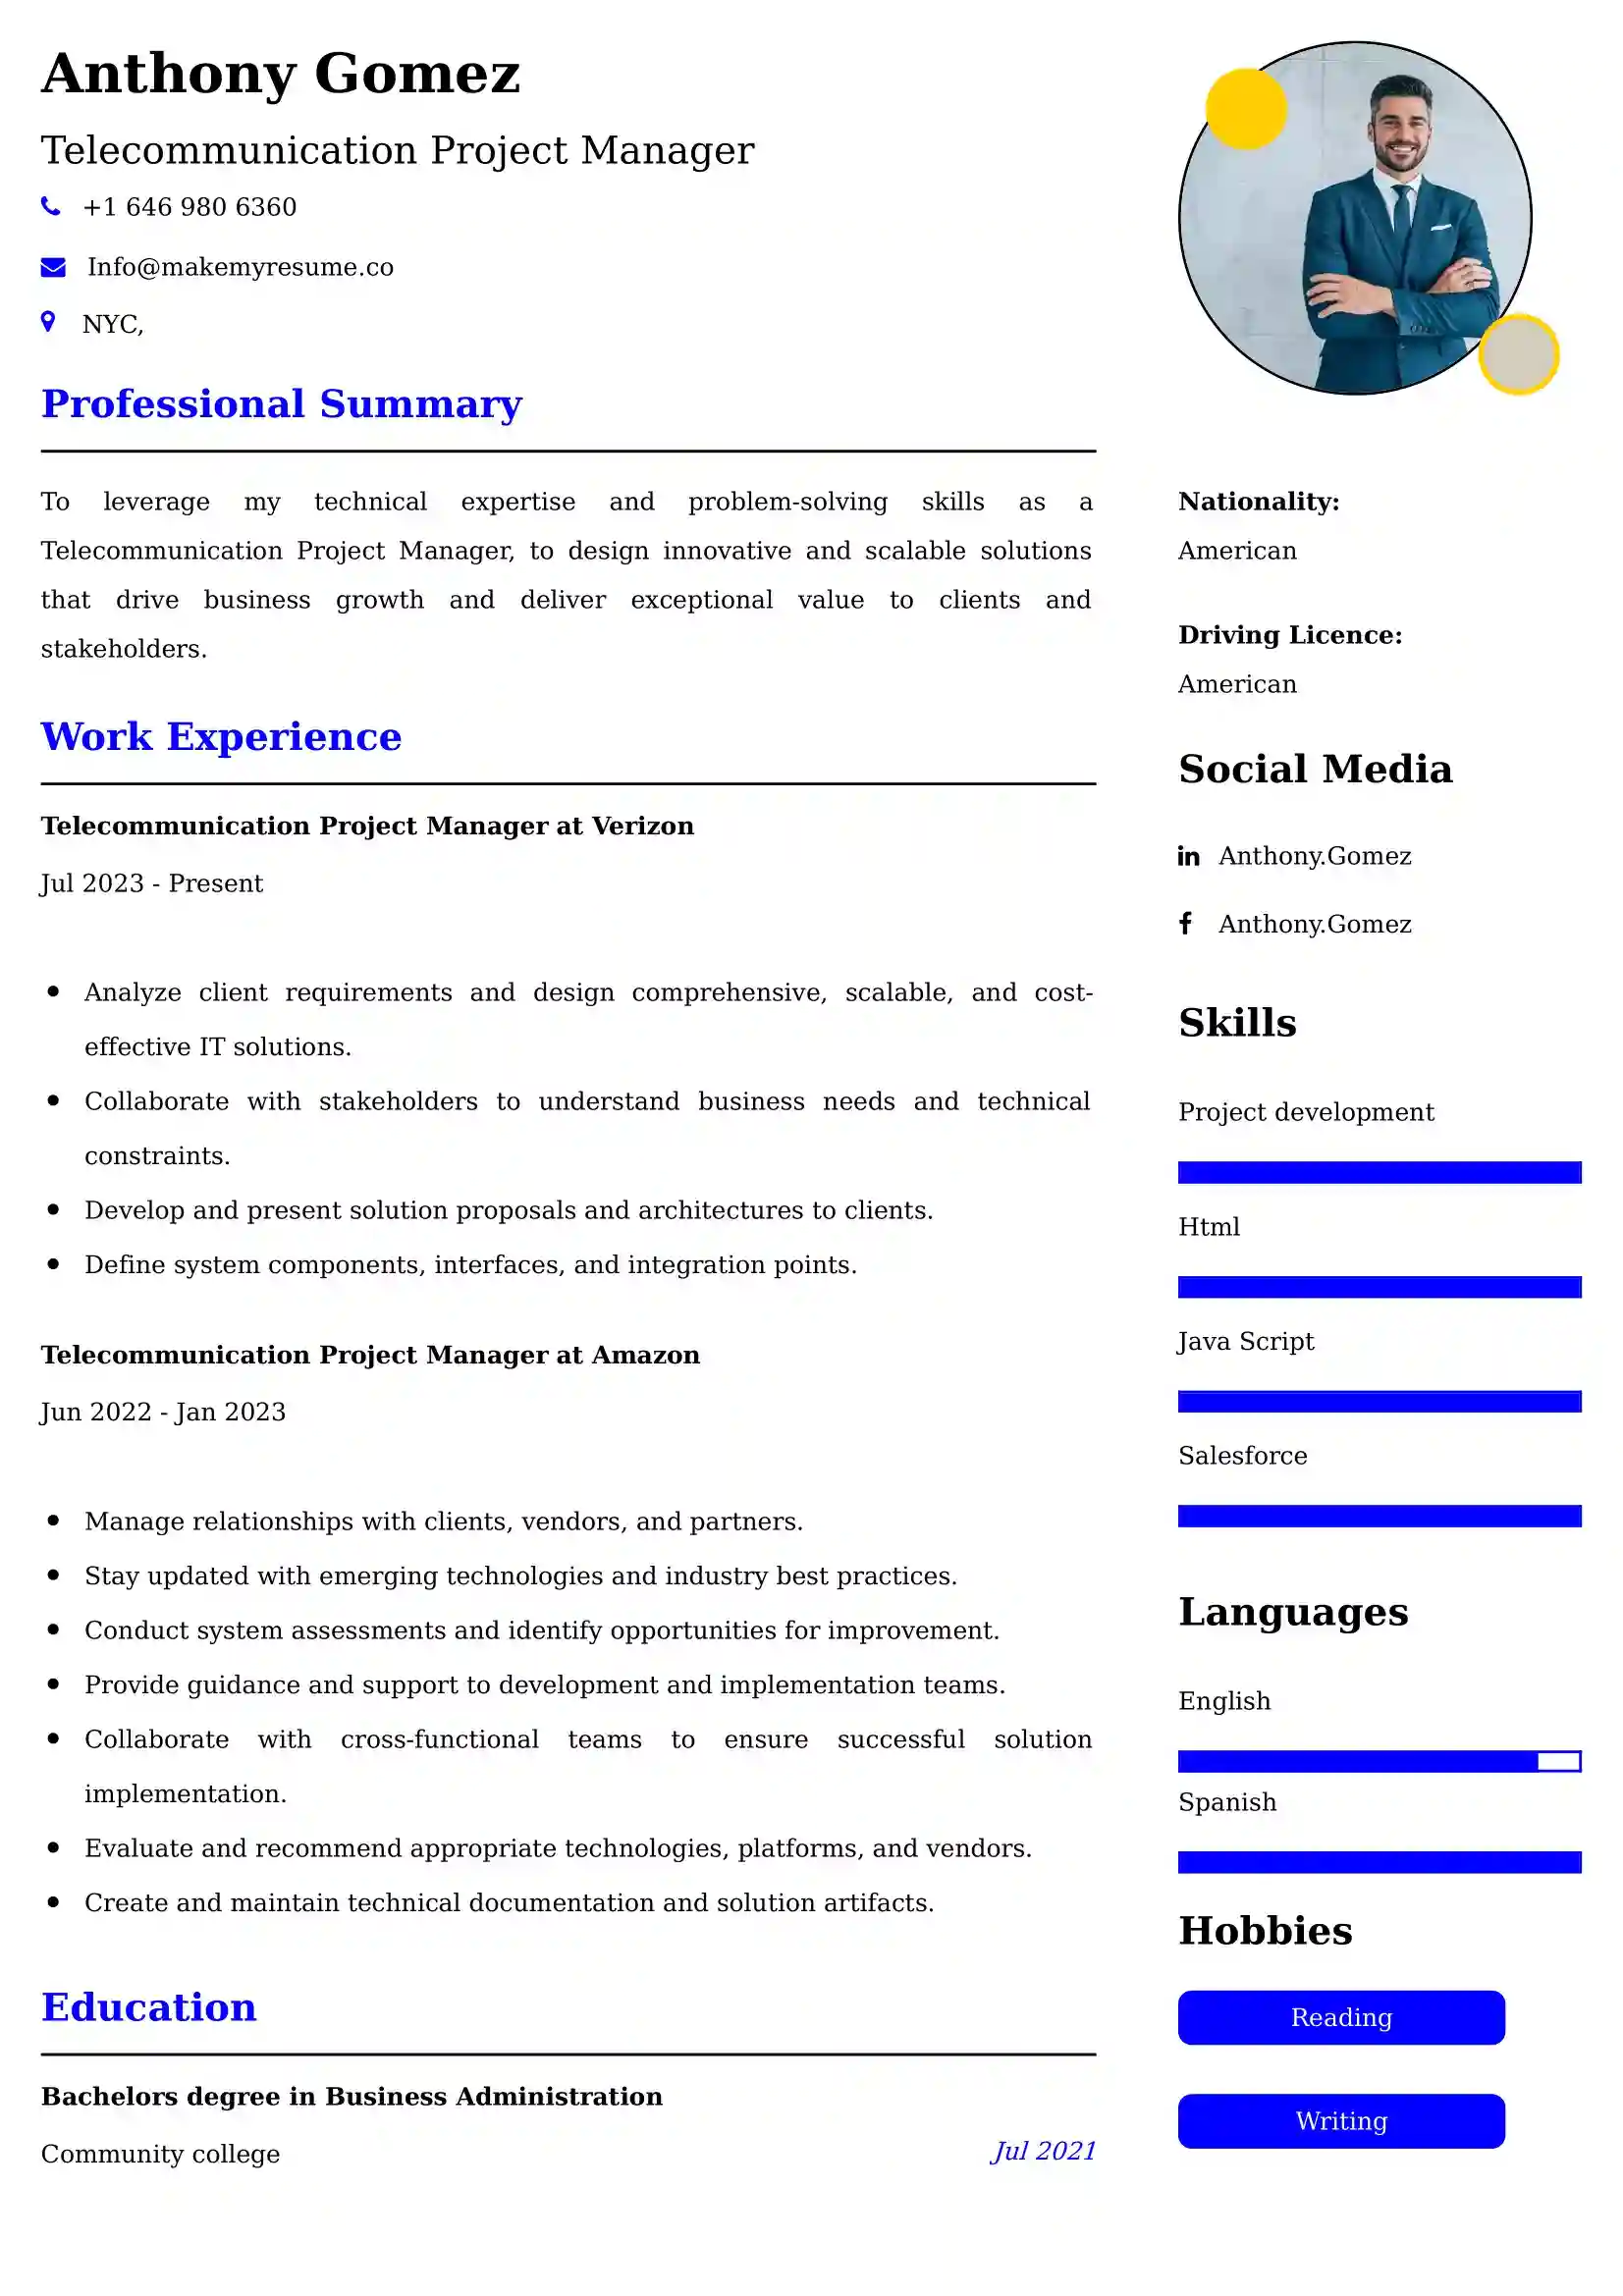 Telecommunication Project Manager Resume Examples - UK Format, Latest Template.